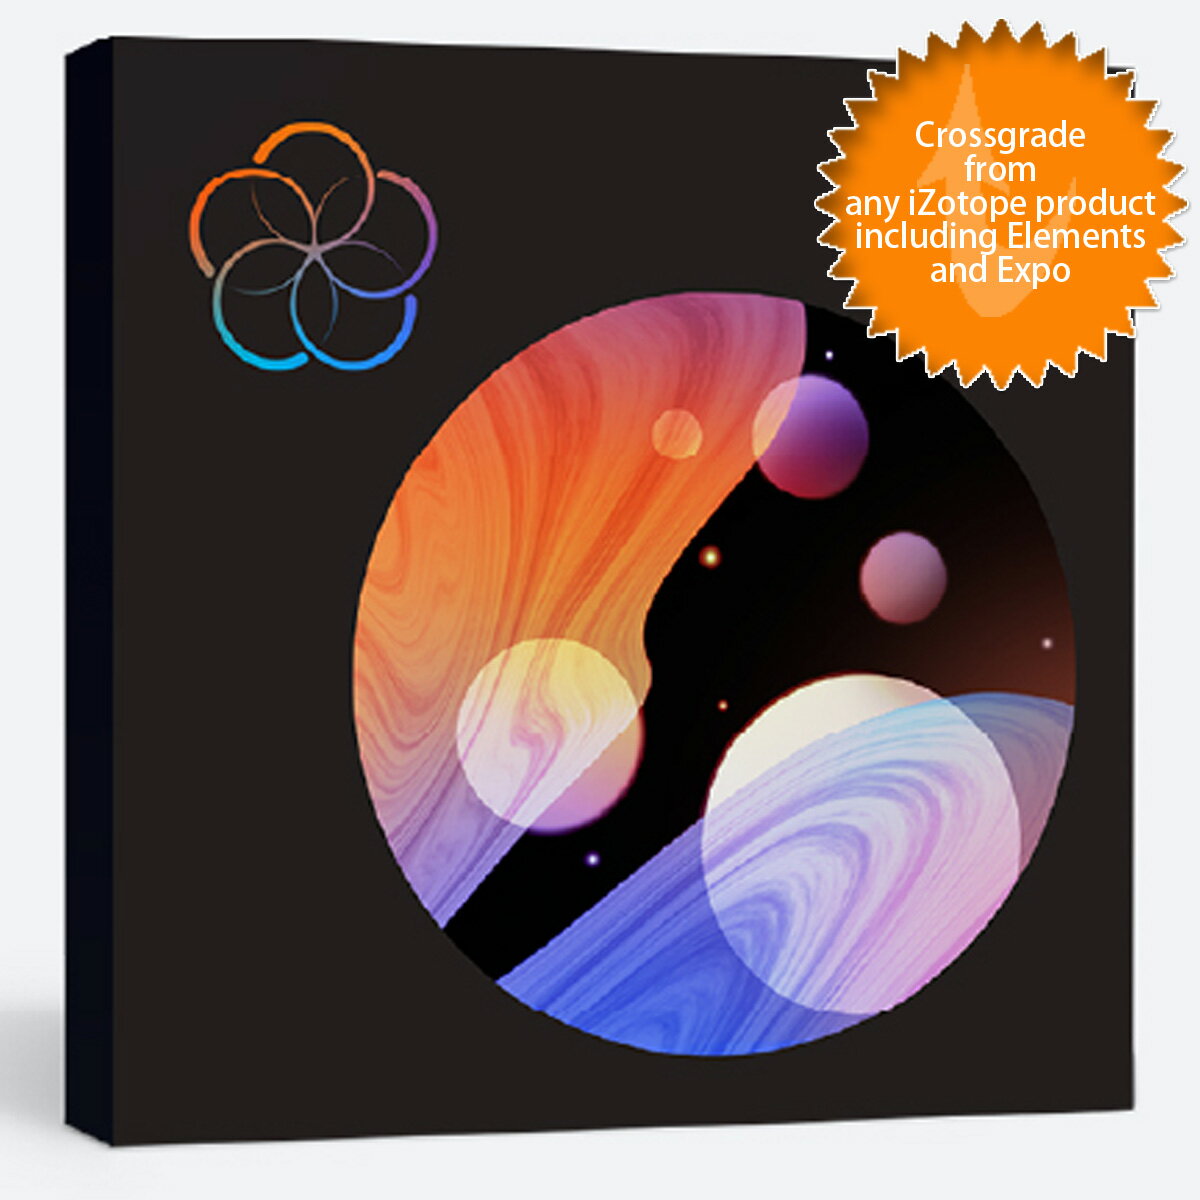 iZotope / Mix & Master Bundle Advanced Crossgrade from any iZotope product, including Elements, and Expo【ダウンロード版メール納品 代引不可】【PNG】